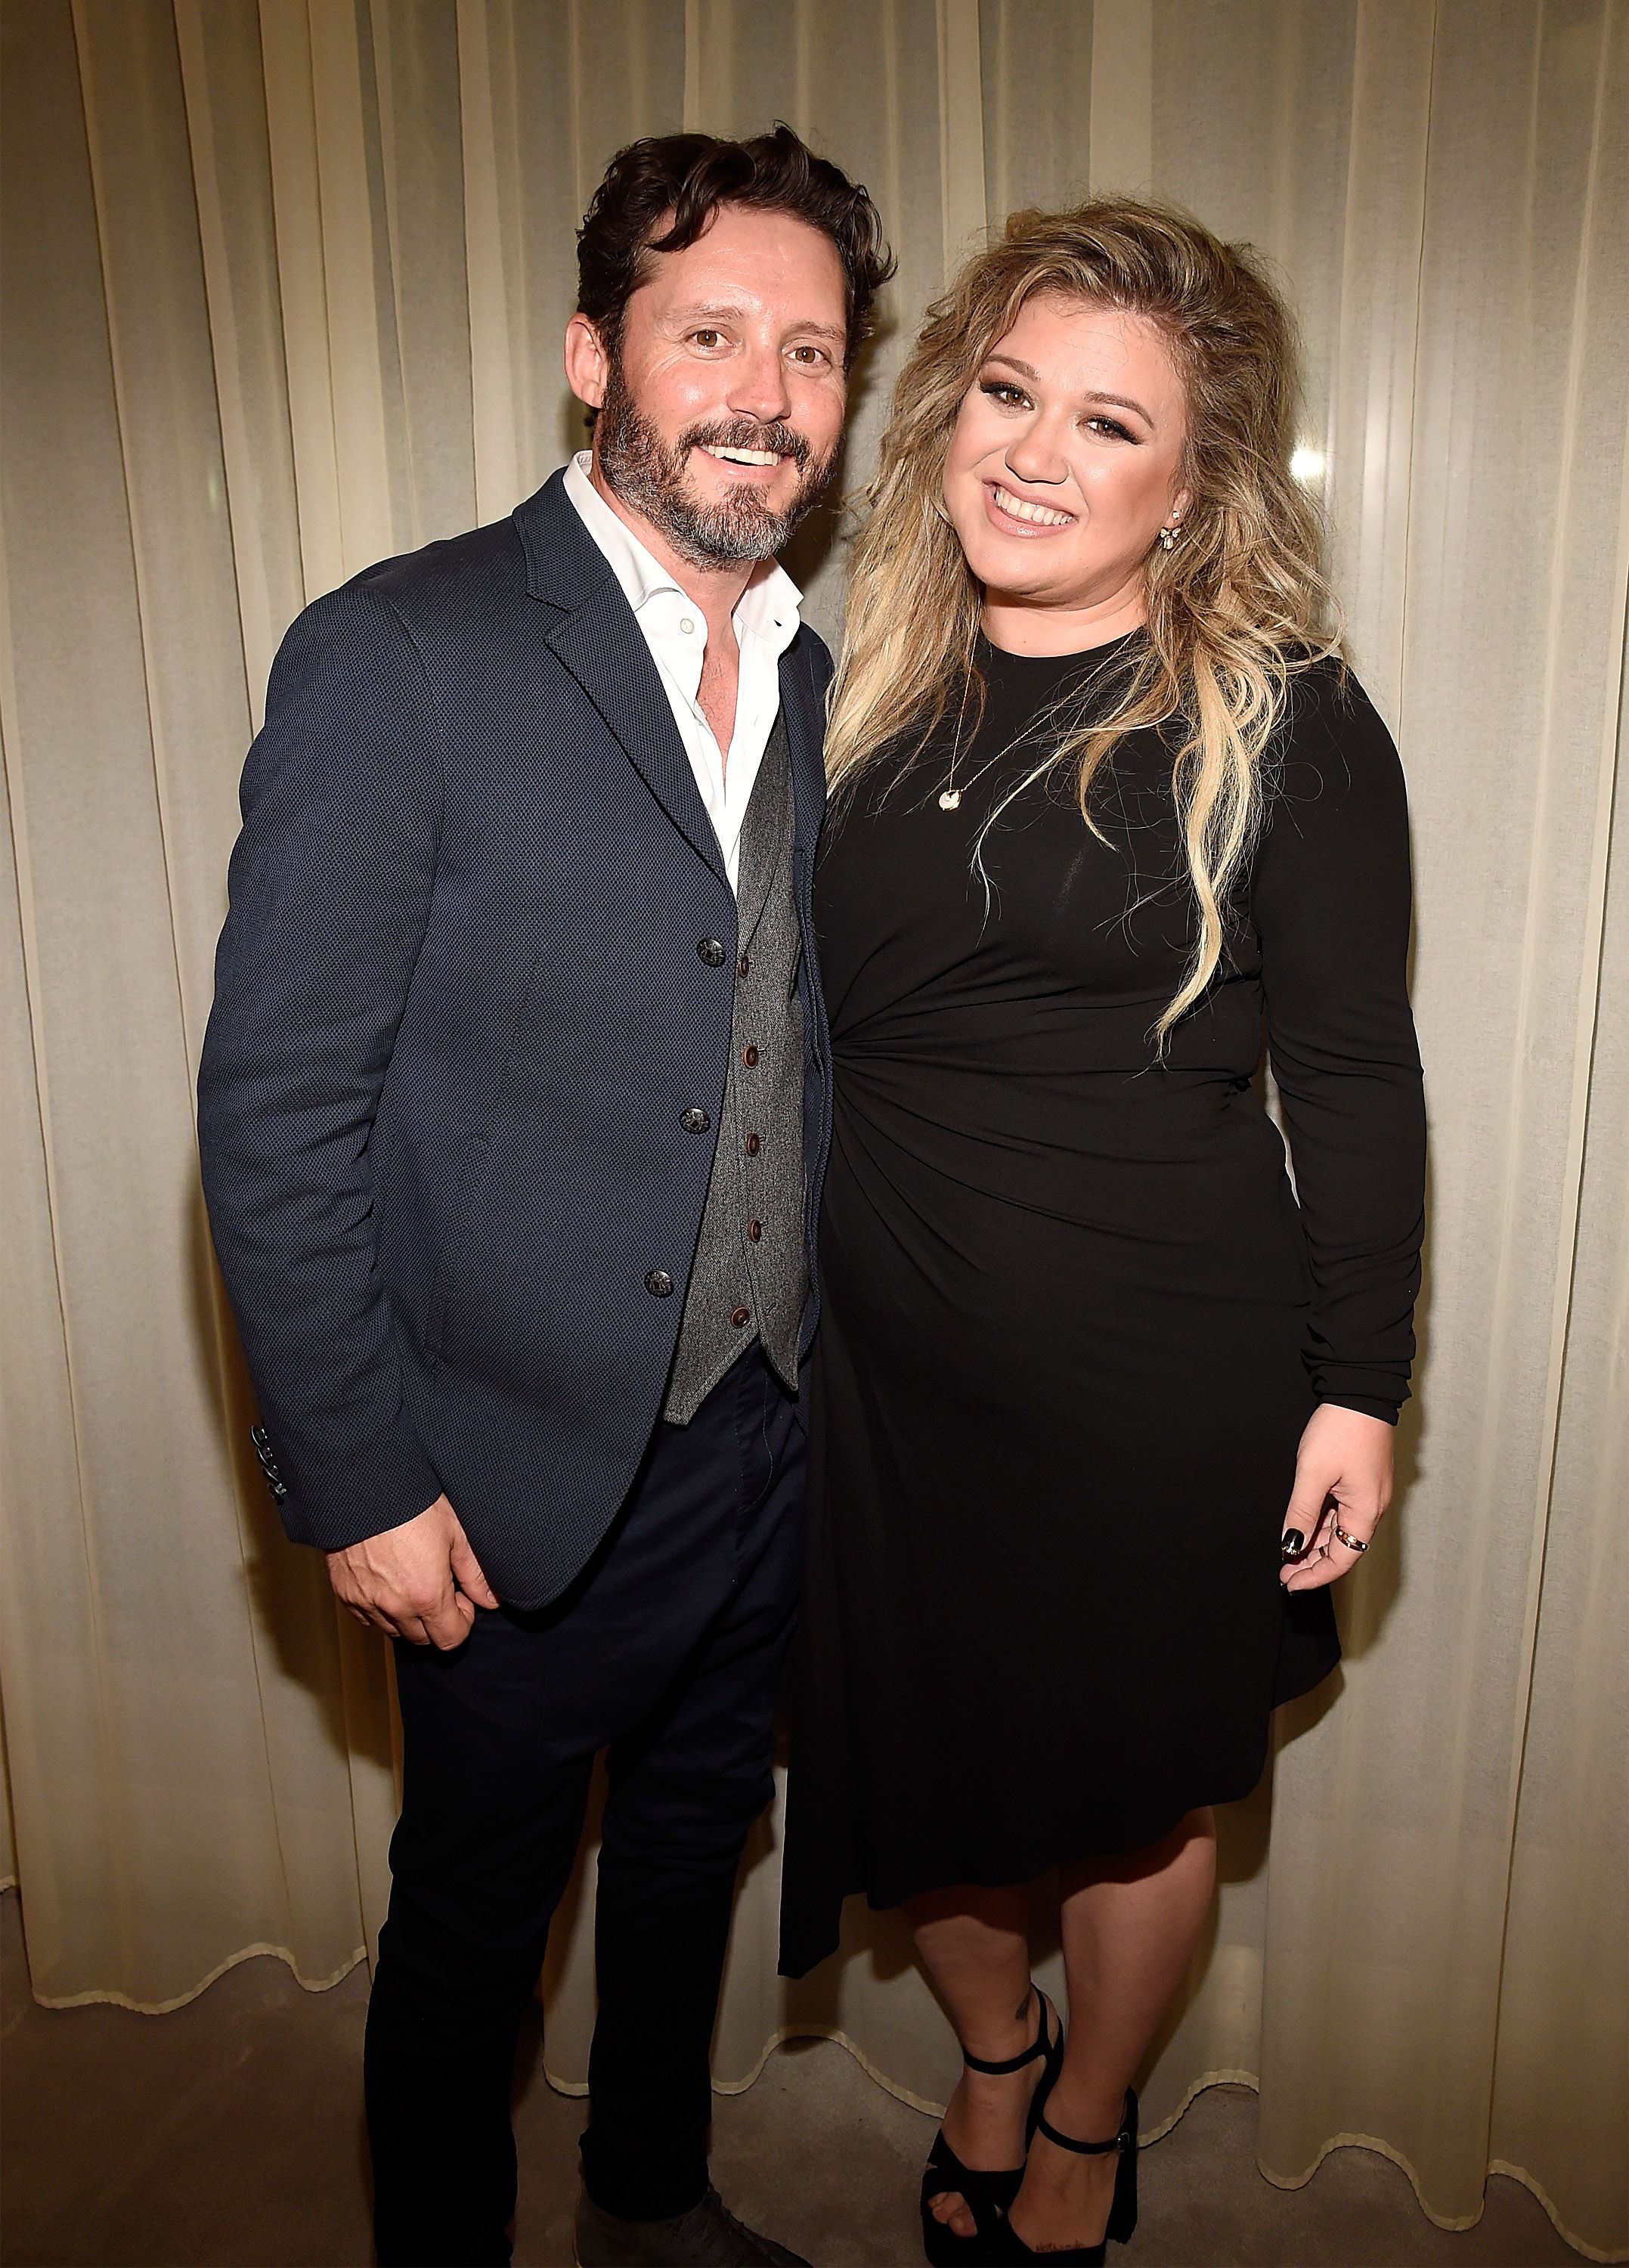 Brandon Blackstock and Kelly Clarkson backstage after she performed songs from her new album "The Meaning of Life" at The Rainbow Room on September 6, 2017 | Photo: Getty Images